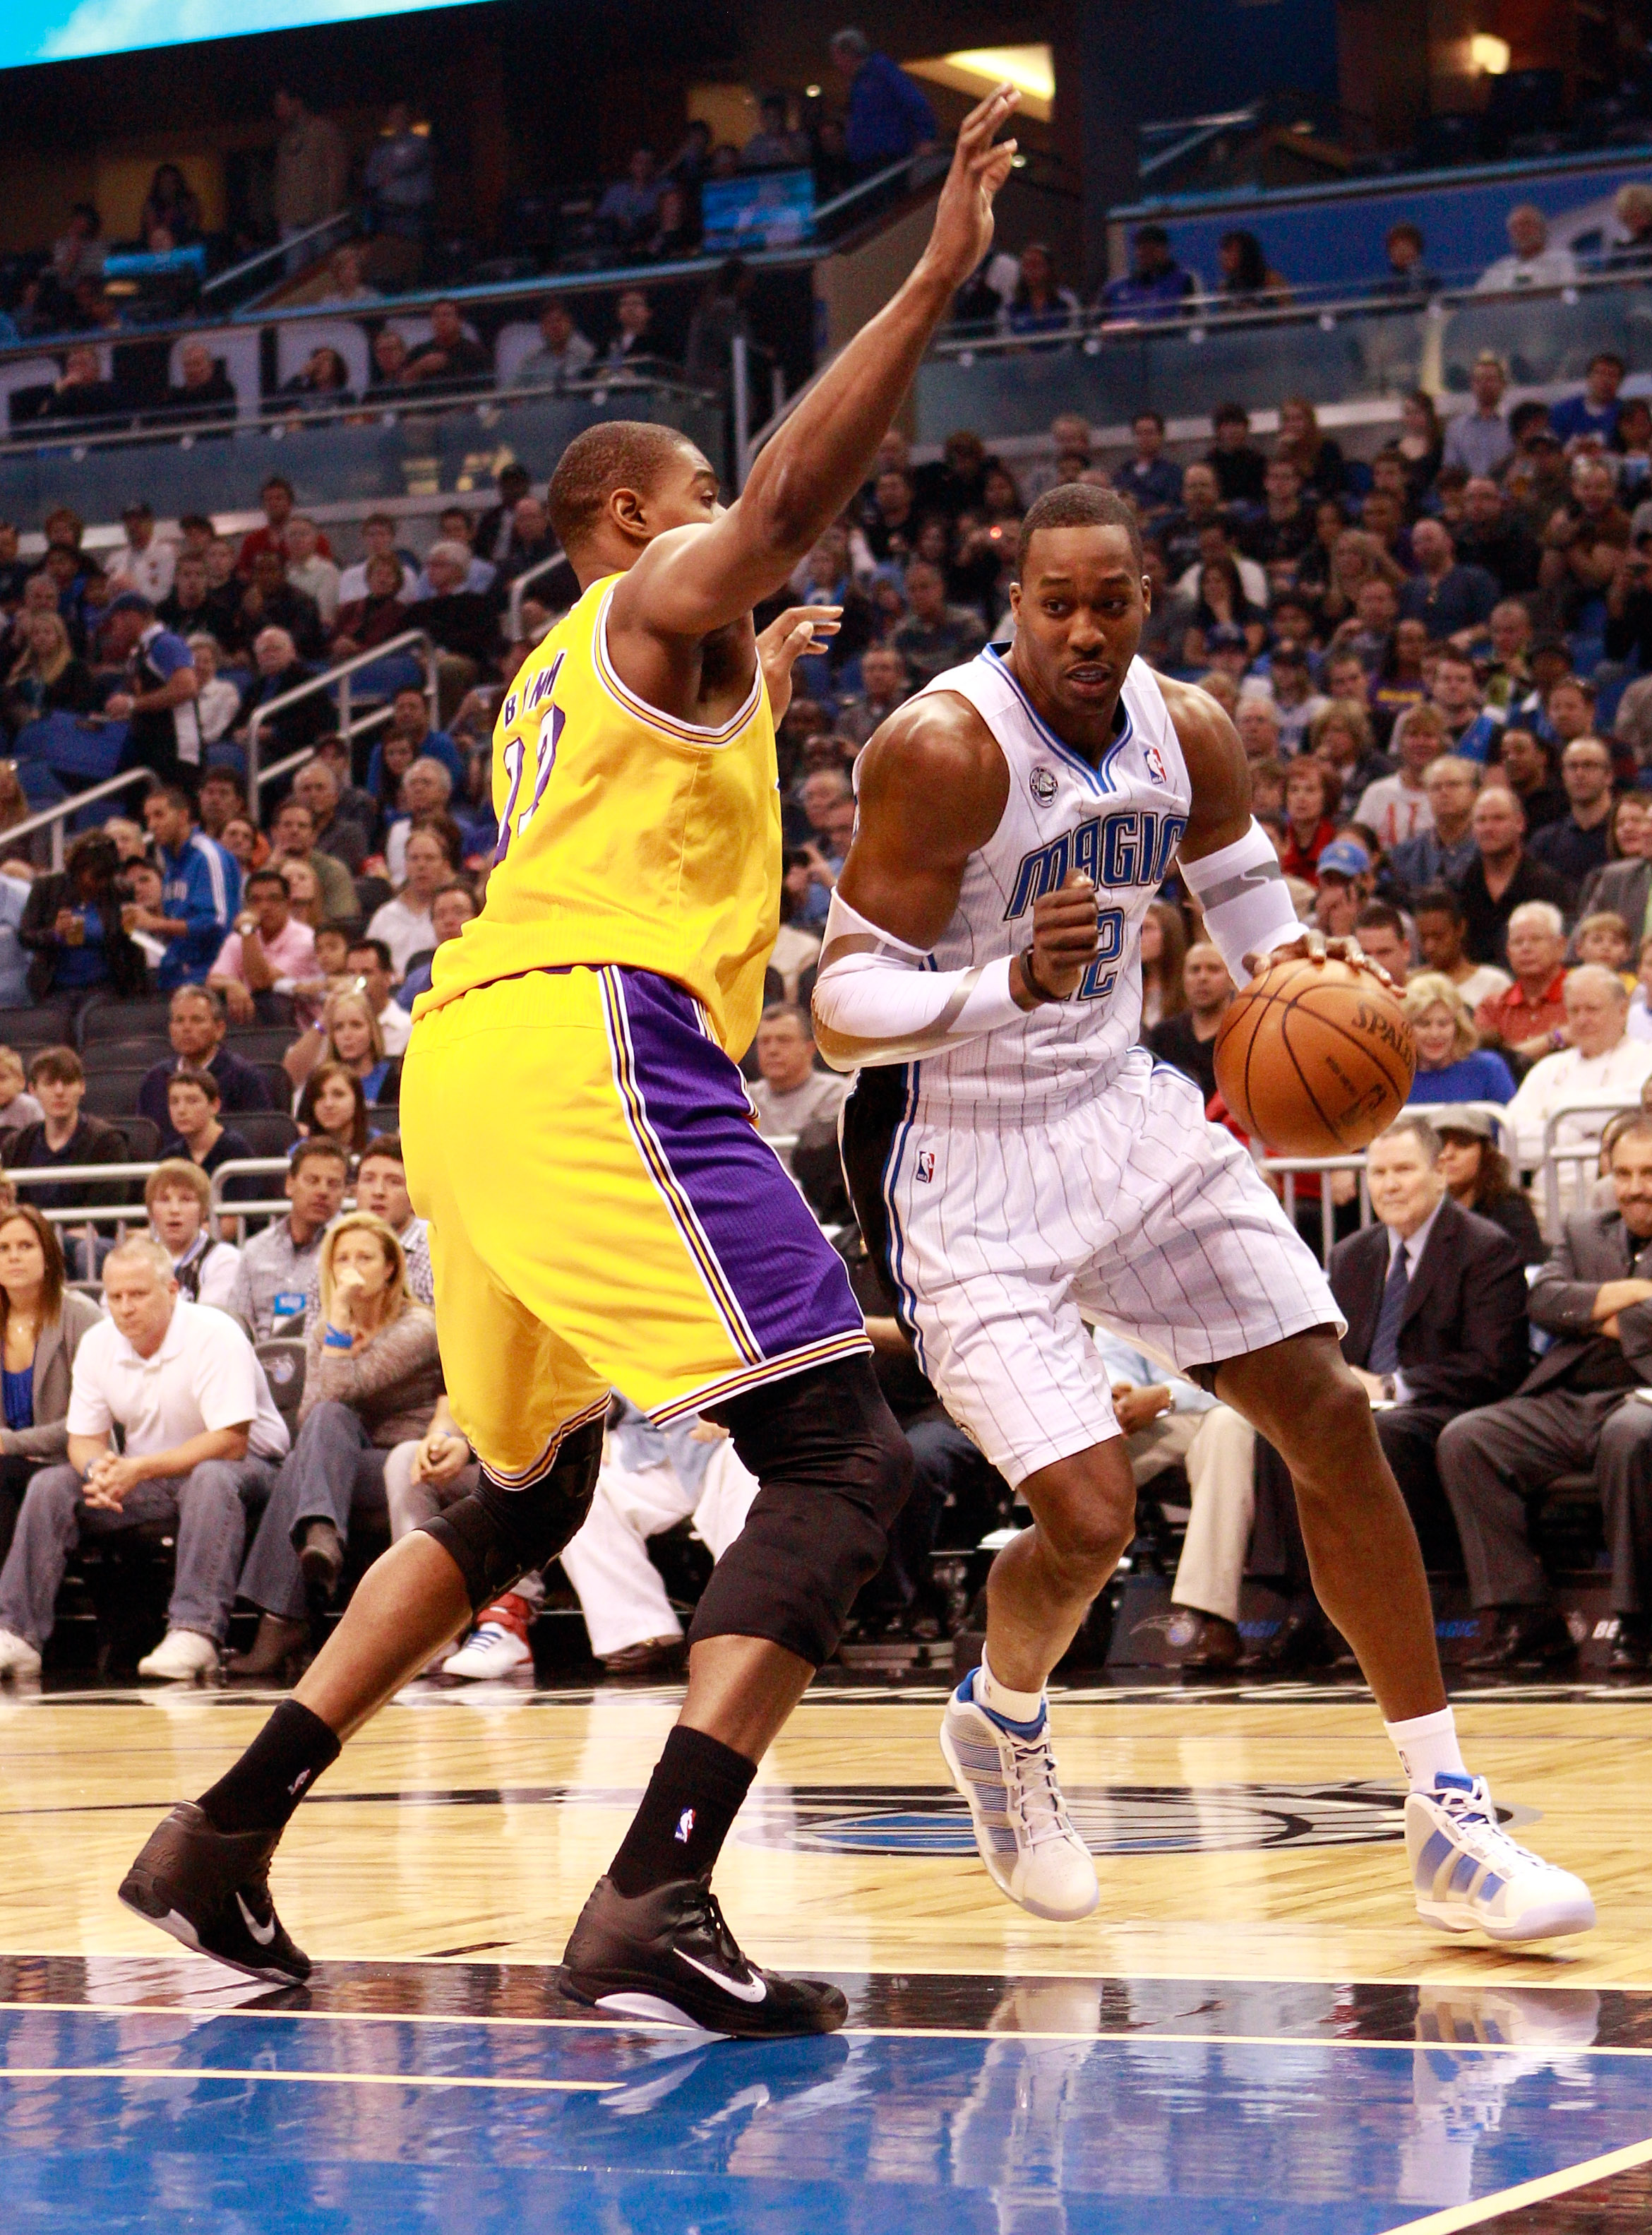 ORLANDO, FL - FEBRUARY 13:  Dwight Howard #12 of the Orlando Magic drives against Andrew Bynum #17 of the Los Angeles Lakers during the game at Amway Arena on February 13, 2011 in Orlando, Florida.  NOTE TO USER: User expressly acknowledges and agrees tha